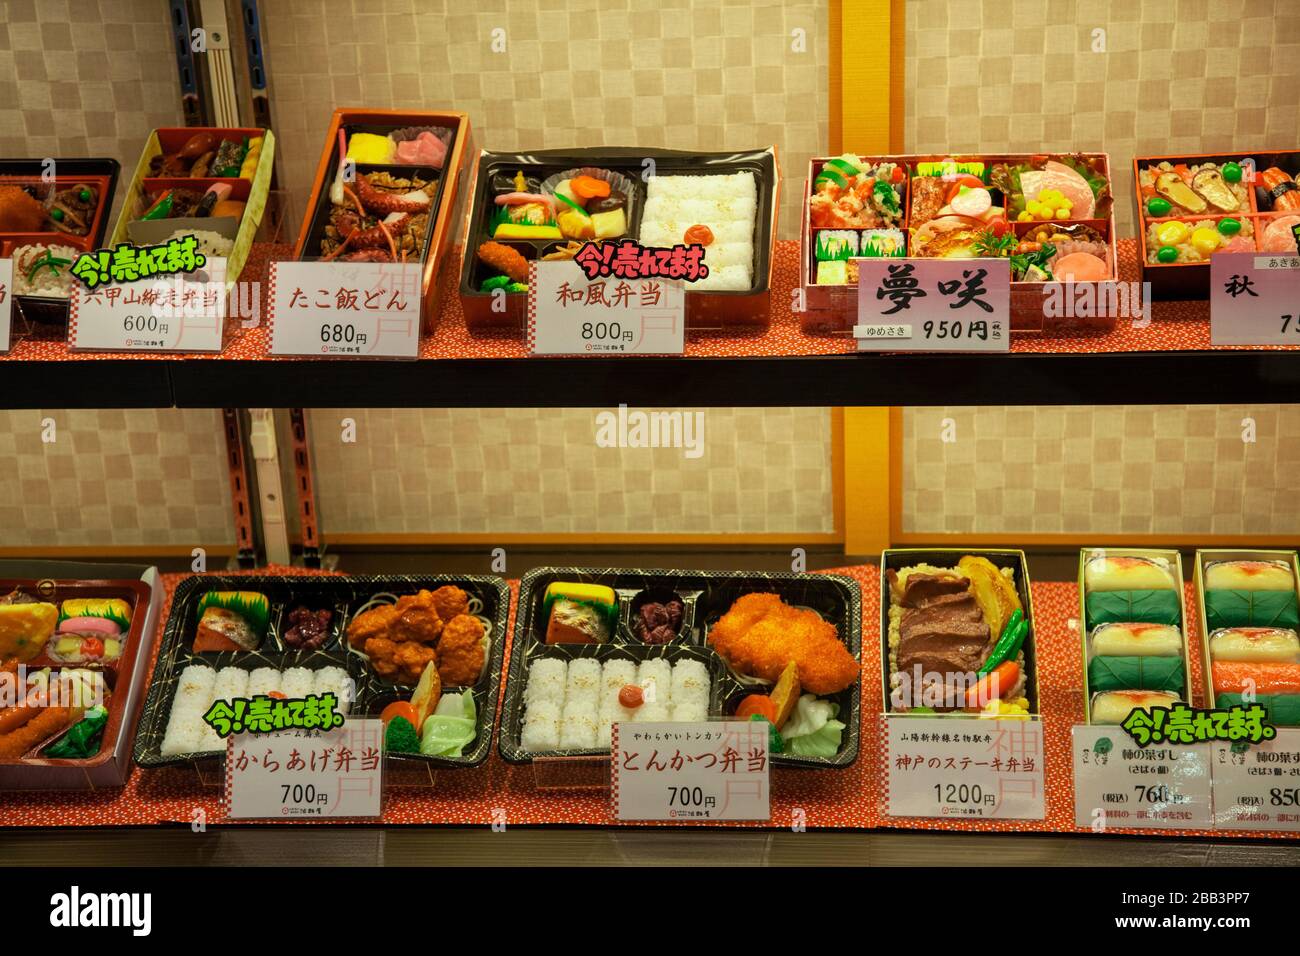 Stall selling Bento boxes. A Bento box is a single-portion takeout or home-packed meal common in Japanese cuisine. Photographed at the Osaka Train sta Stock Photo